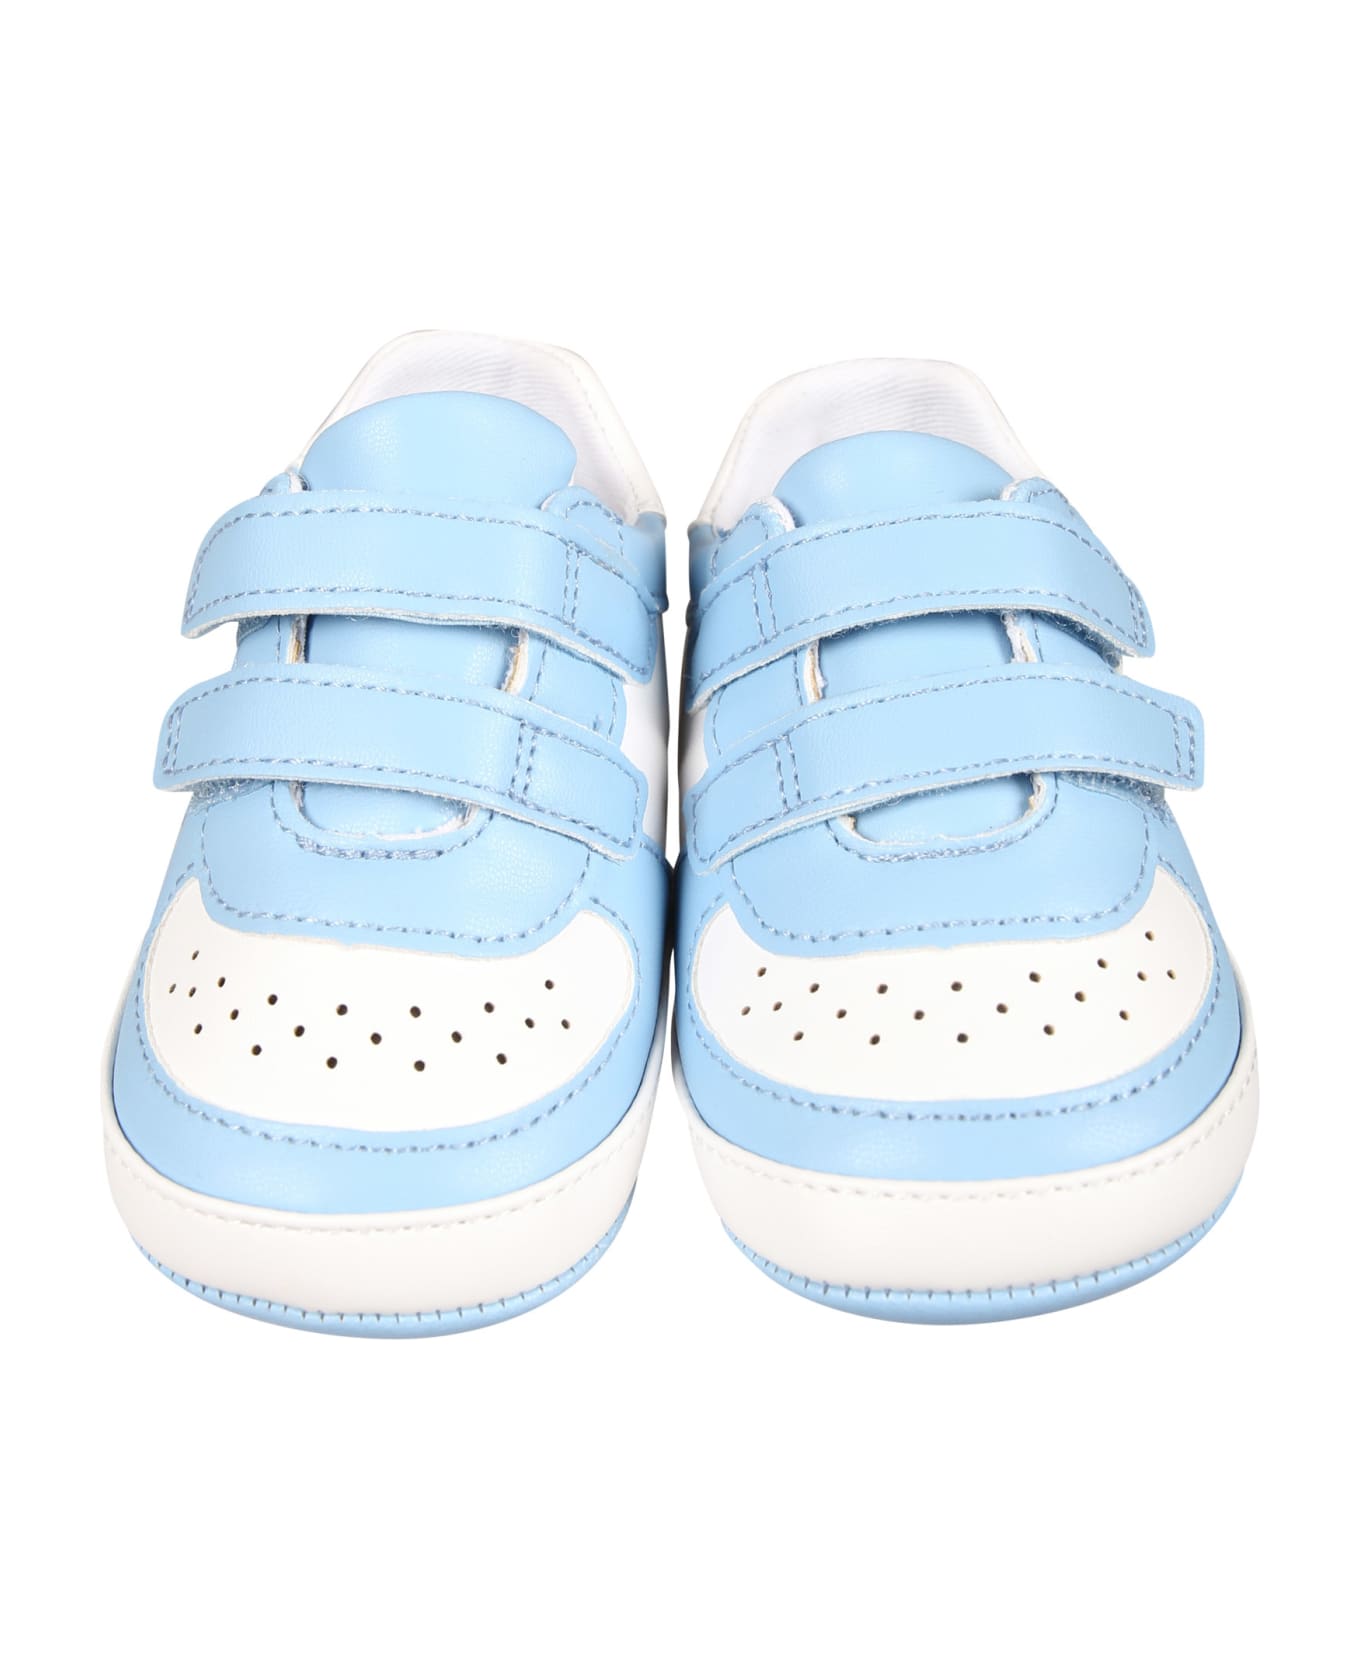 Calvin Klein Light Blue Sneakers For Baby Boy With Logo - Light Blue